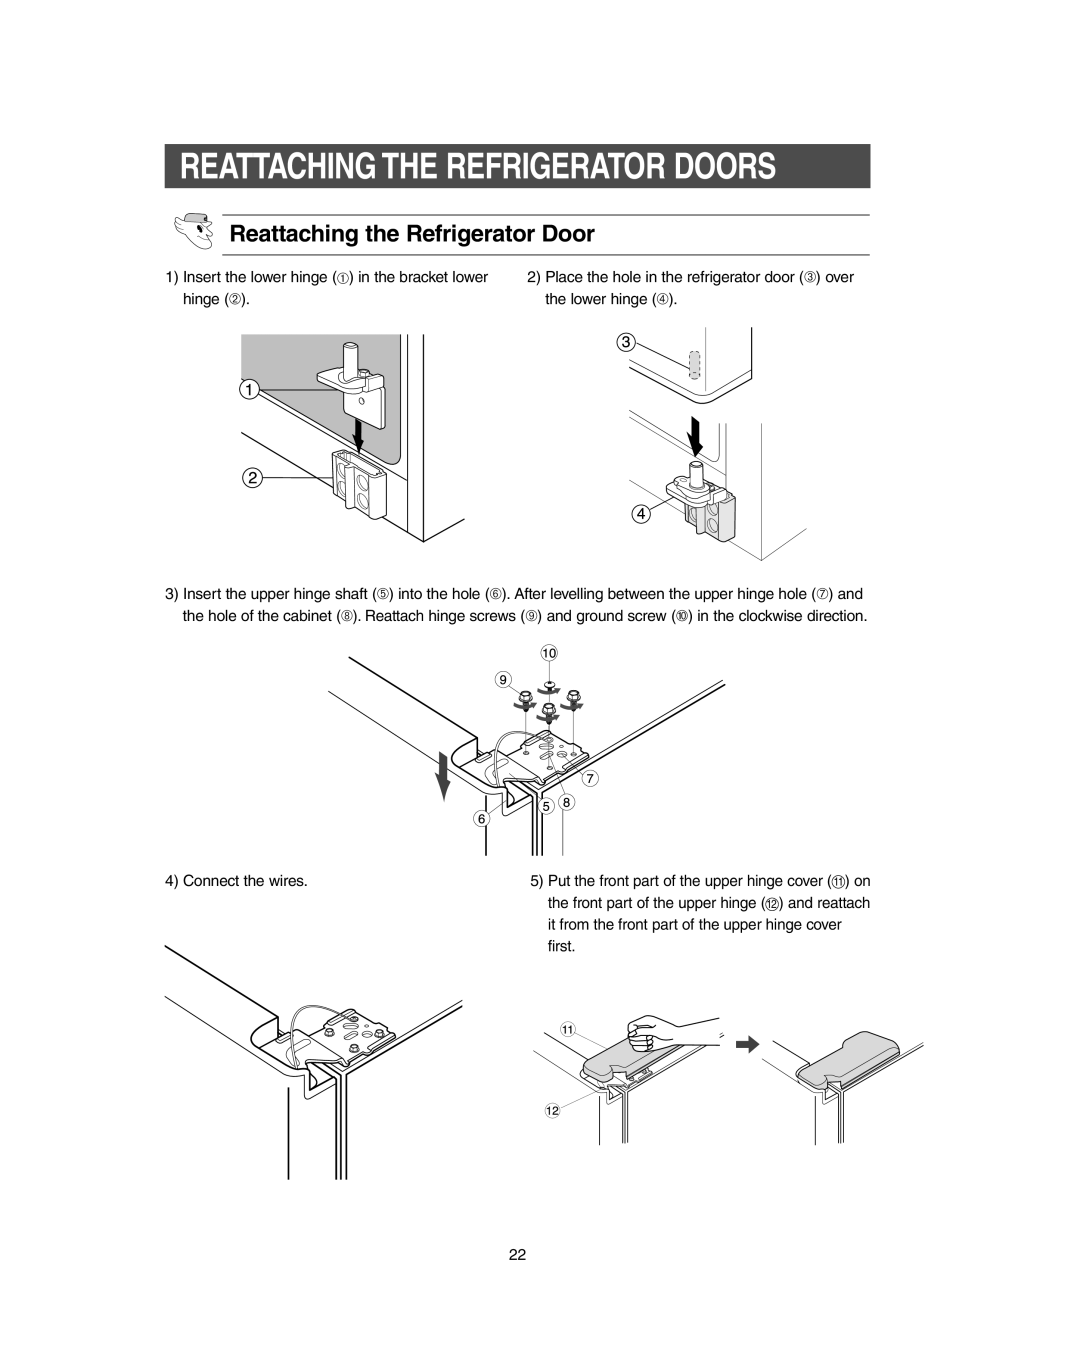 Samsung RS267LBSH owner manual Reattaching the Refrigerator Door, Reattaching The Refrigerator Doors 